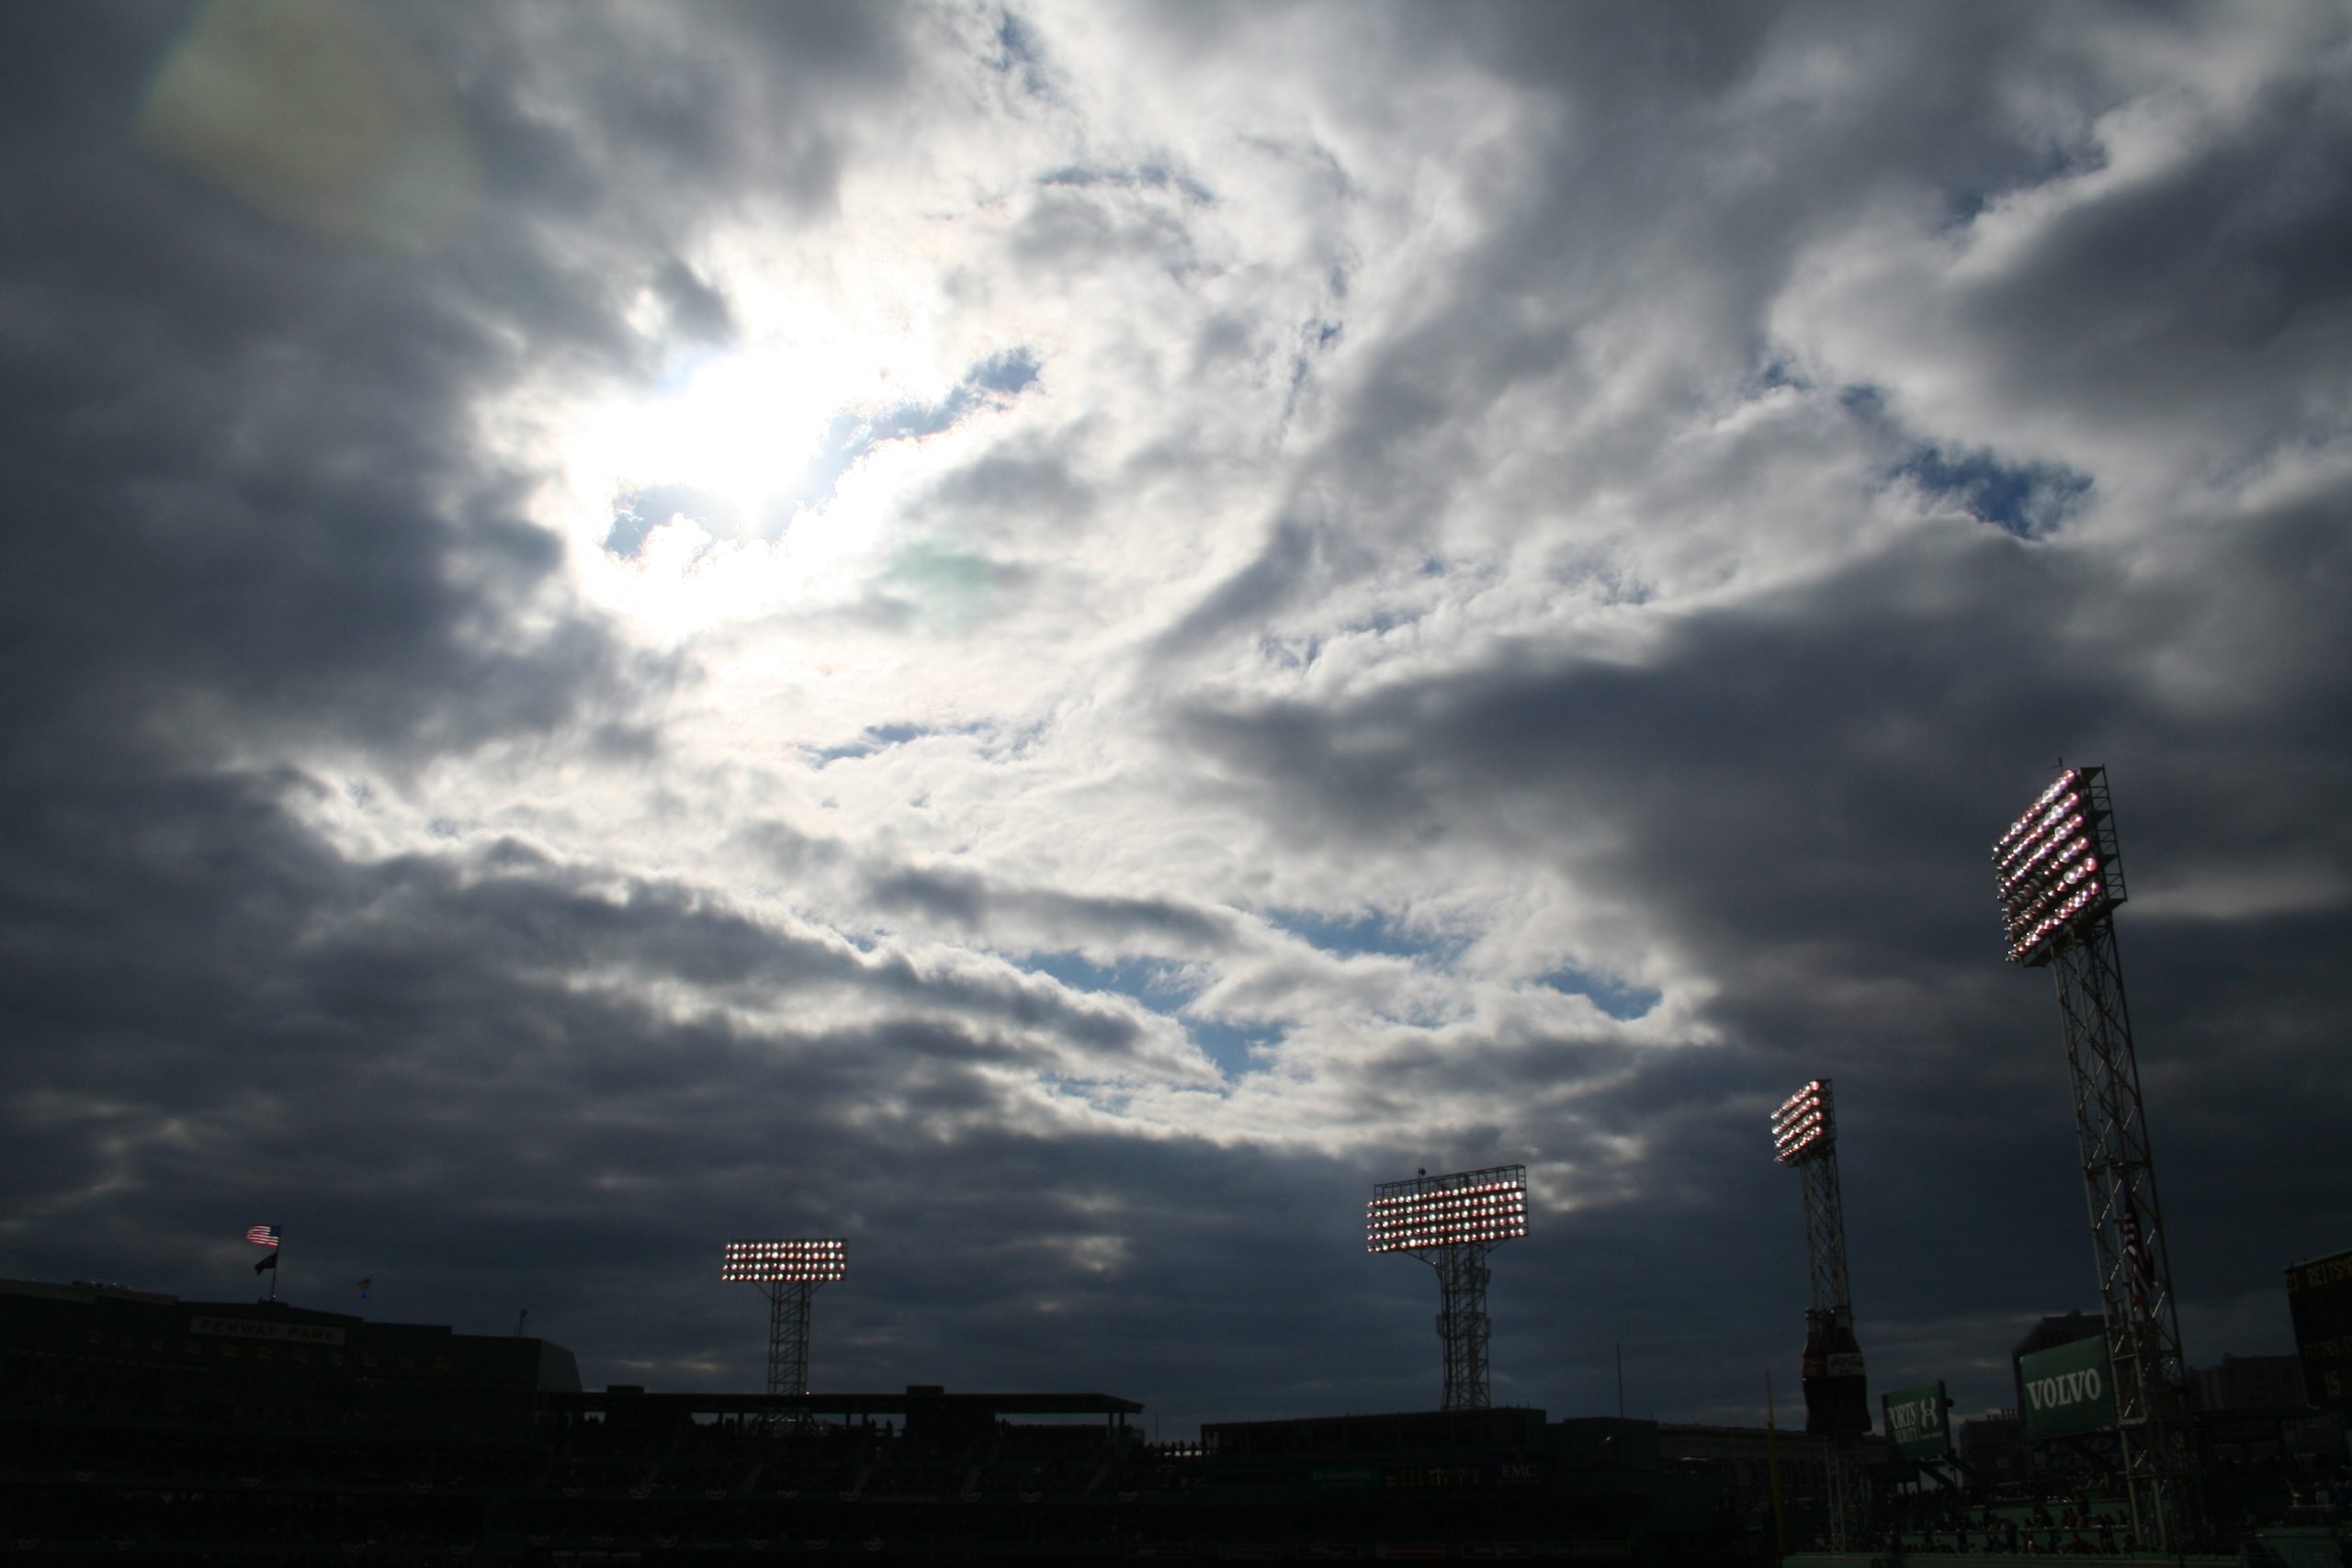 Sox Over Fenway (user submitted)